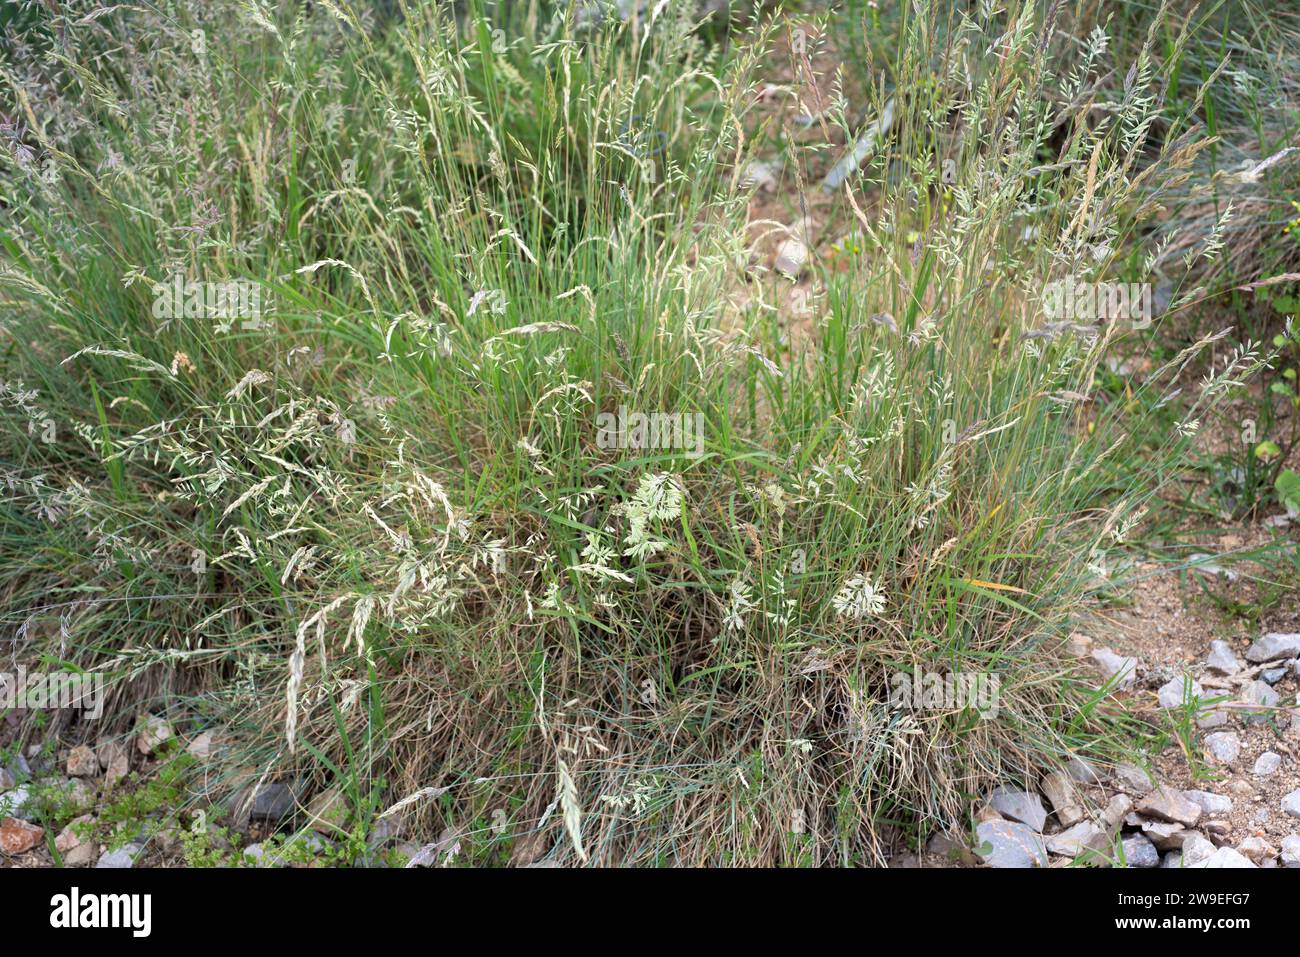 Festuca liviensis or Festuca ovina liviensis is a perennial herb endemic to Pyrenees. Stock Photo